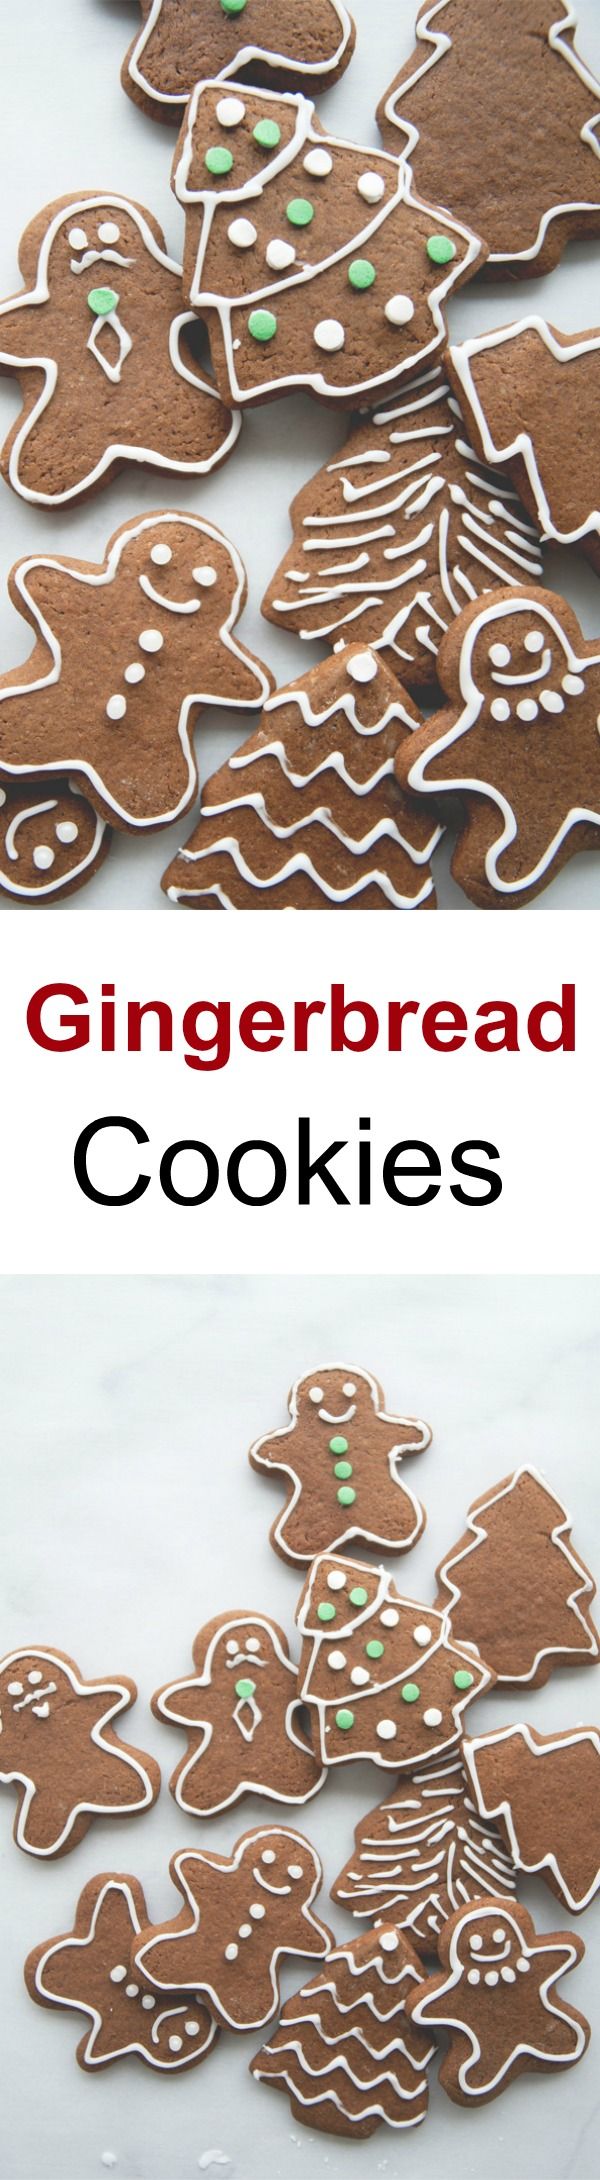 Gingerbread Cookies – the best gingerbread cookies recipe by @Claire Thomas. Yields crispy, aromatic and festive holidays cookies | rasamalaysia.com